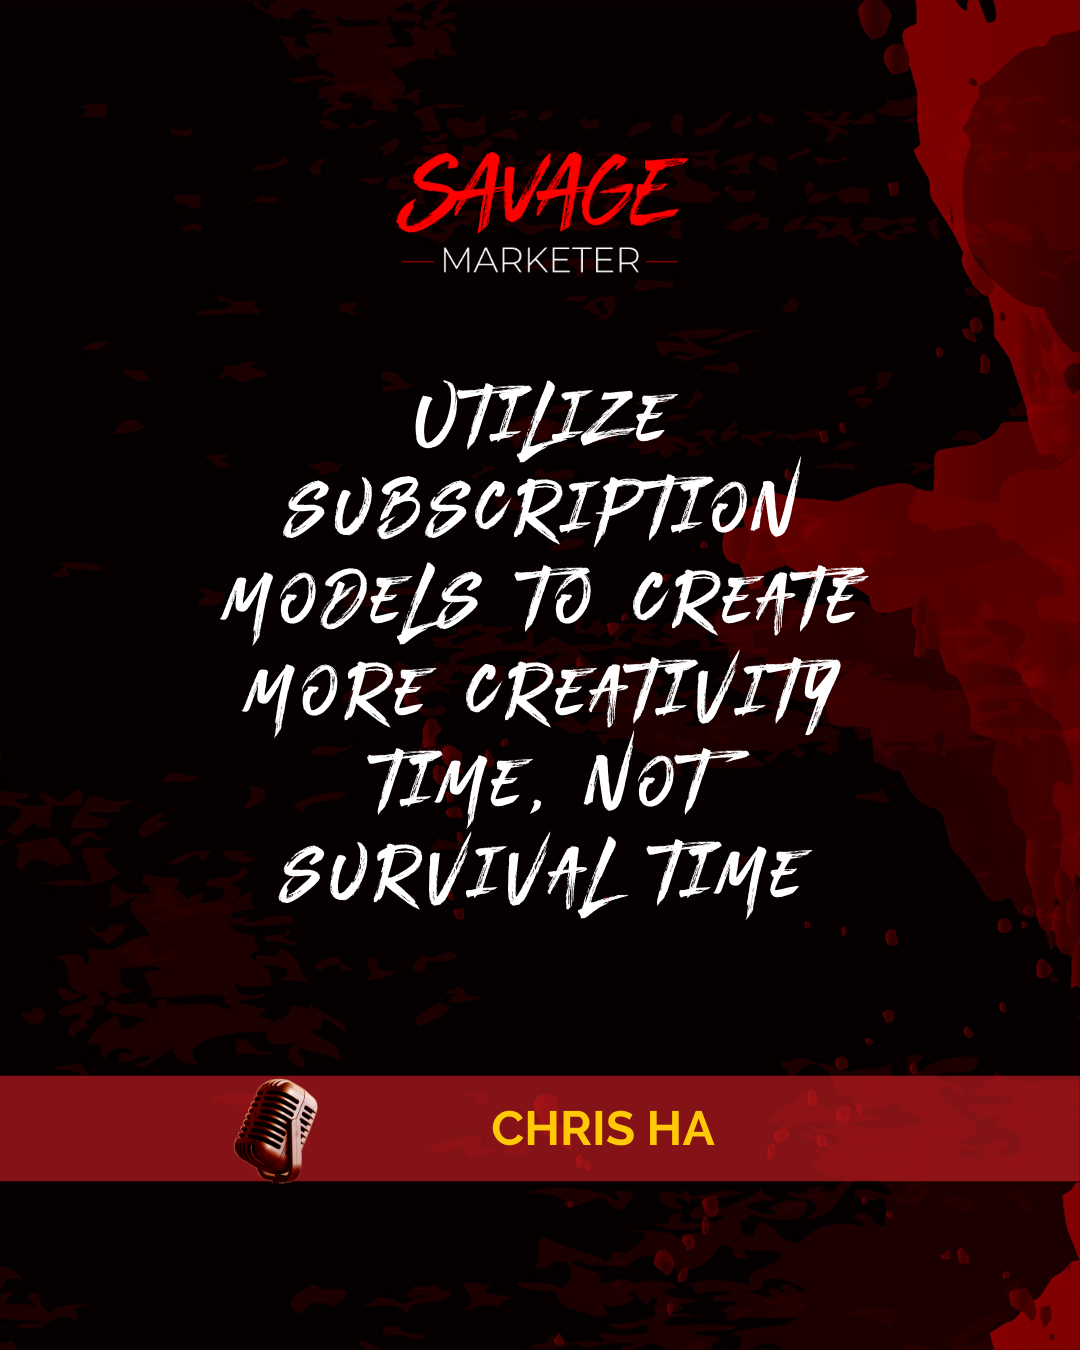 Utilize subscription models to create more creativity time, not survival time. Chris HA